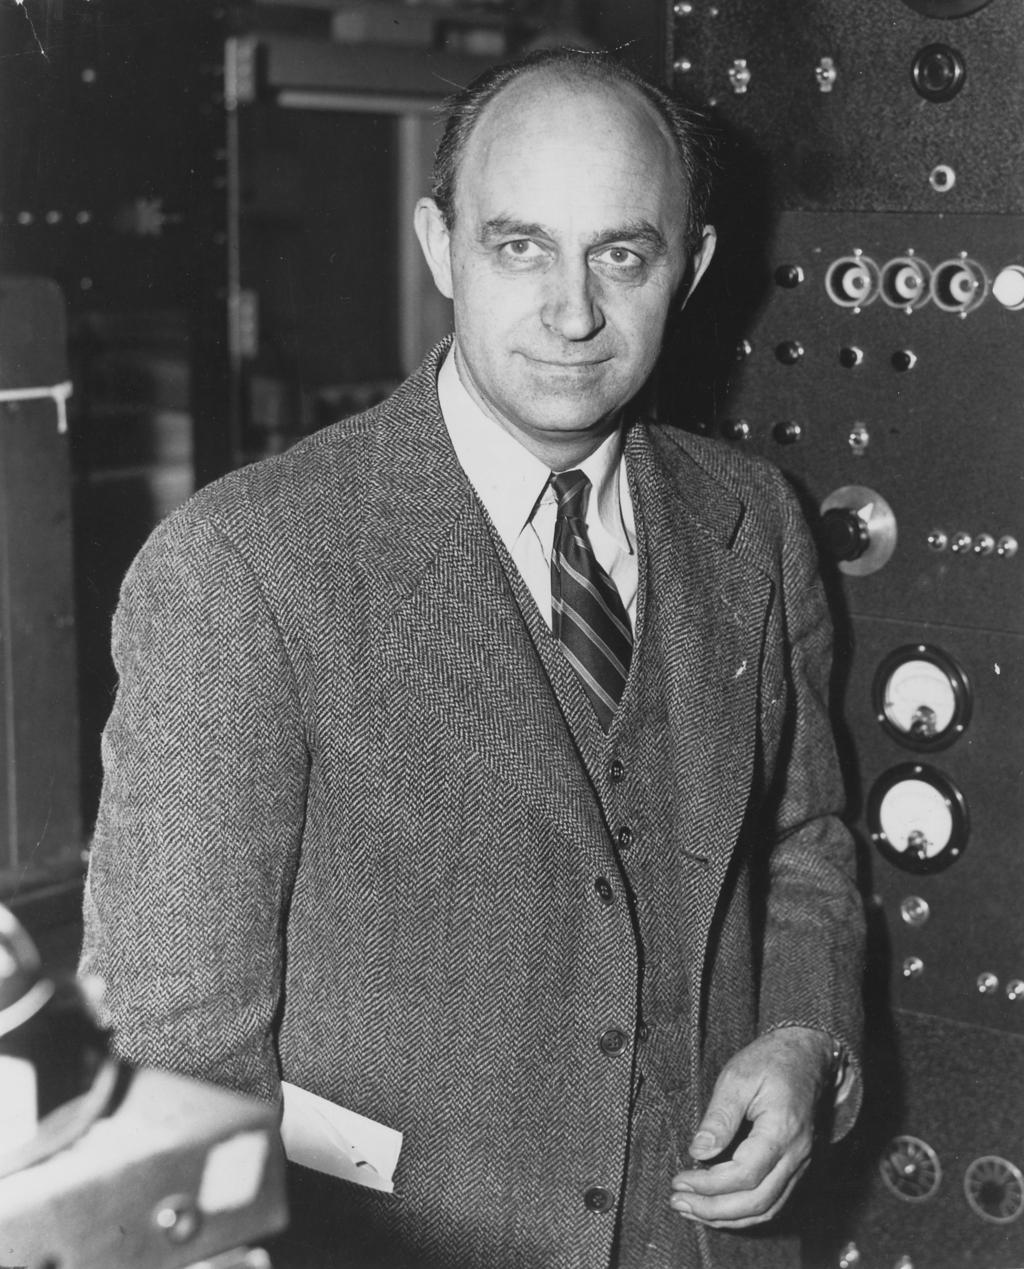 Fermi Problems Enrico Fermi (1901-1954) was an Italian-American physicist, famous for his work in atomic physics. In fact, his group was responsible for building the world s first nuclear reactor.